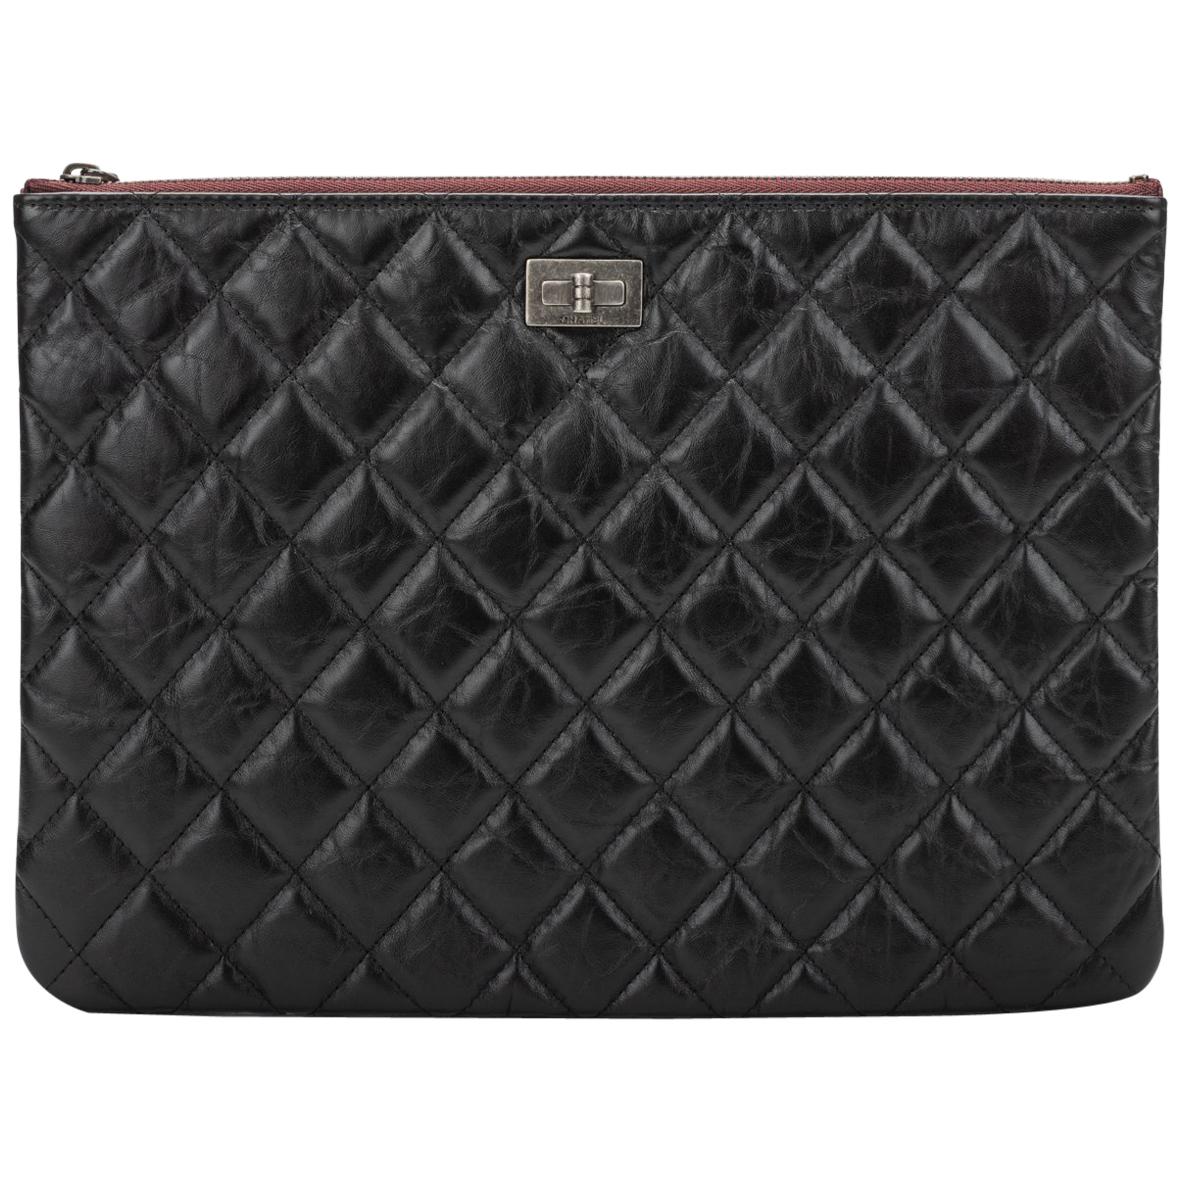 New in Box Chanel  Black Reissue Leather Clutch Bag